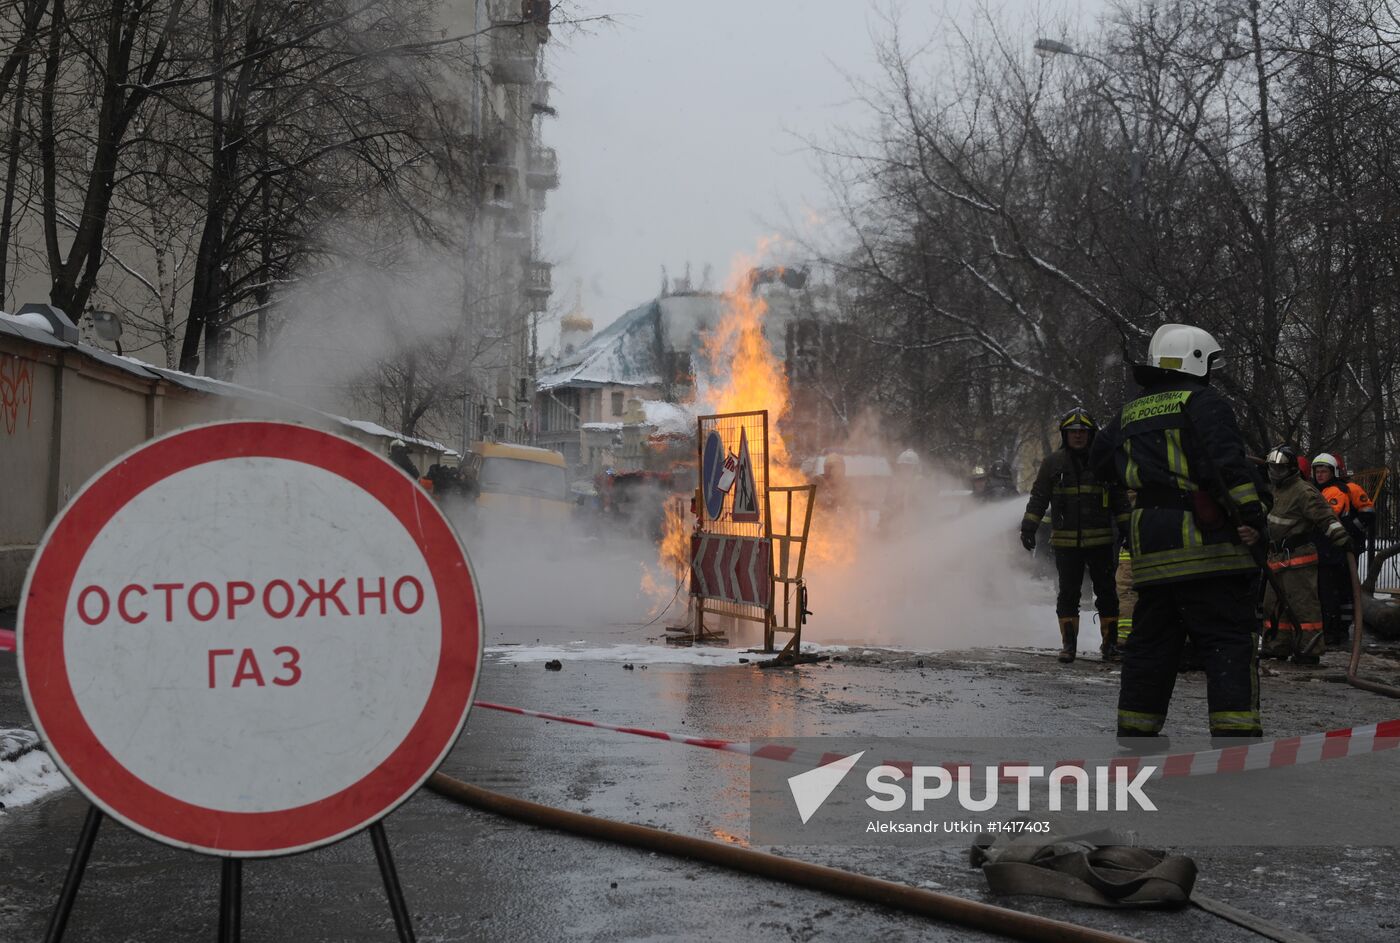 Gas pipeline ruptures in downtown Moscow